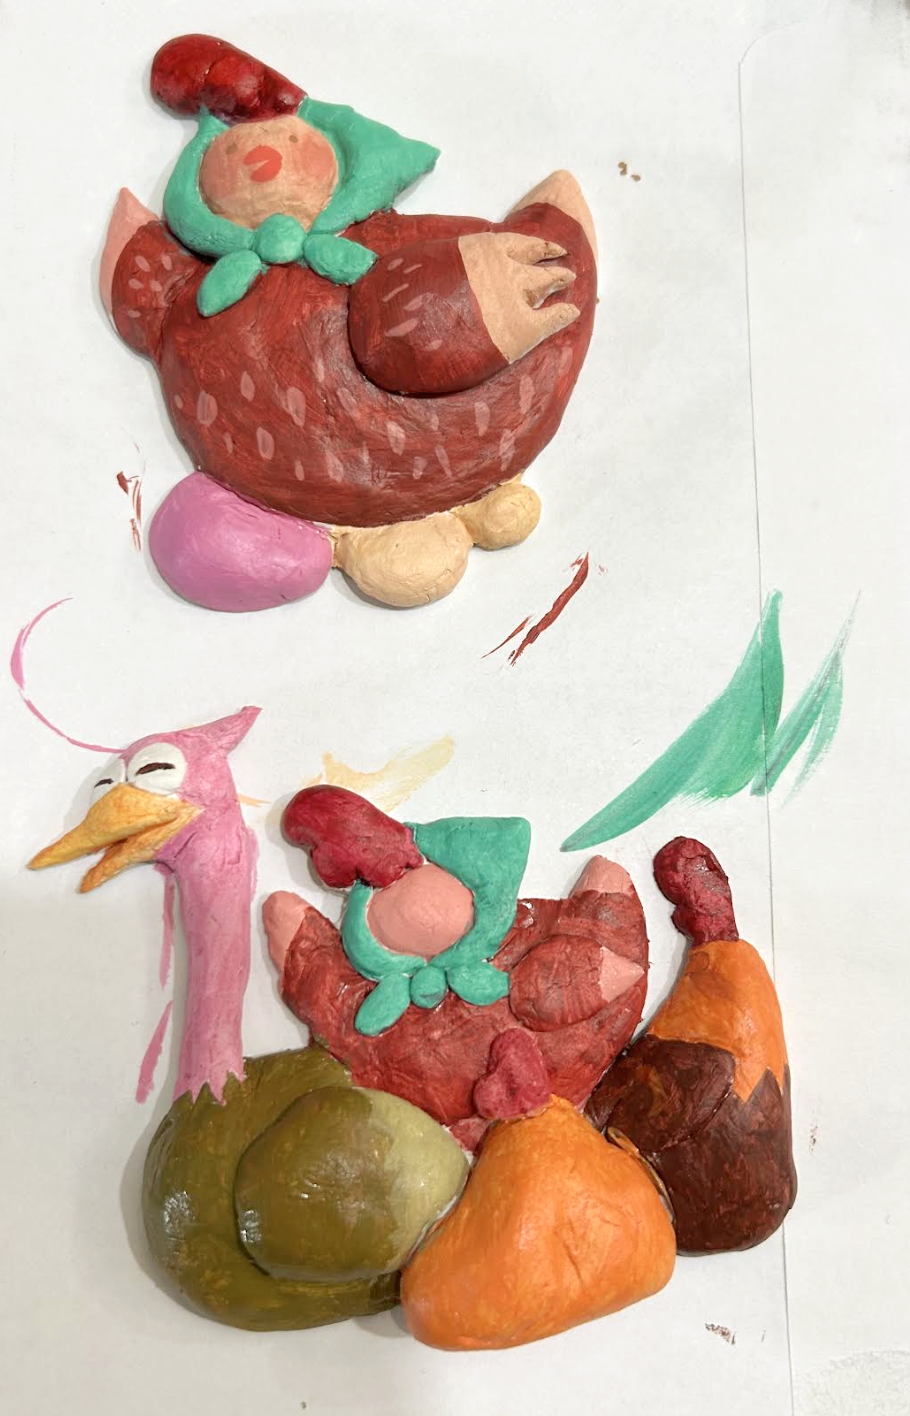 Photograph of partially painted clay showing mother hen and her children